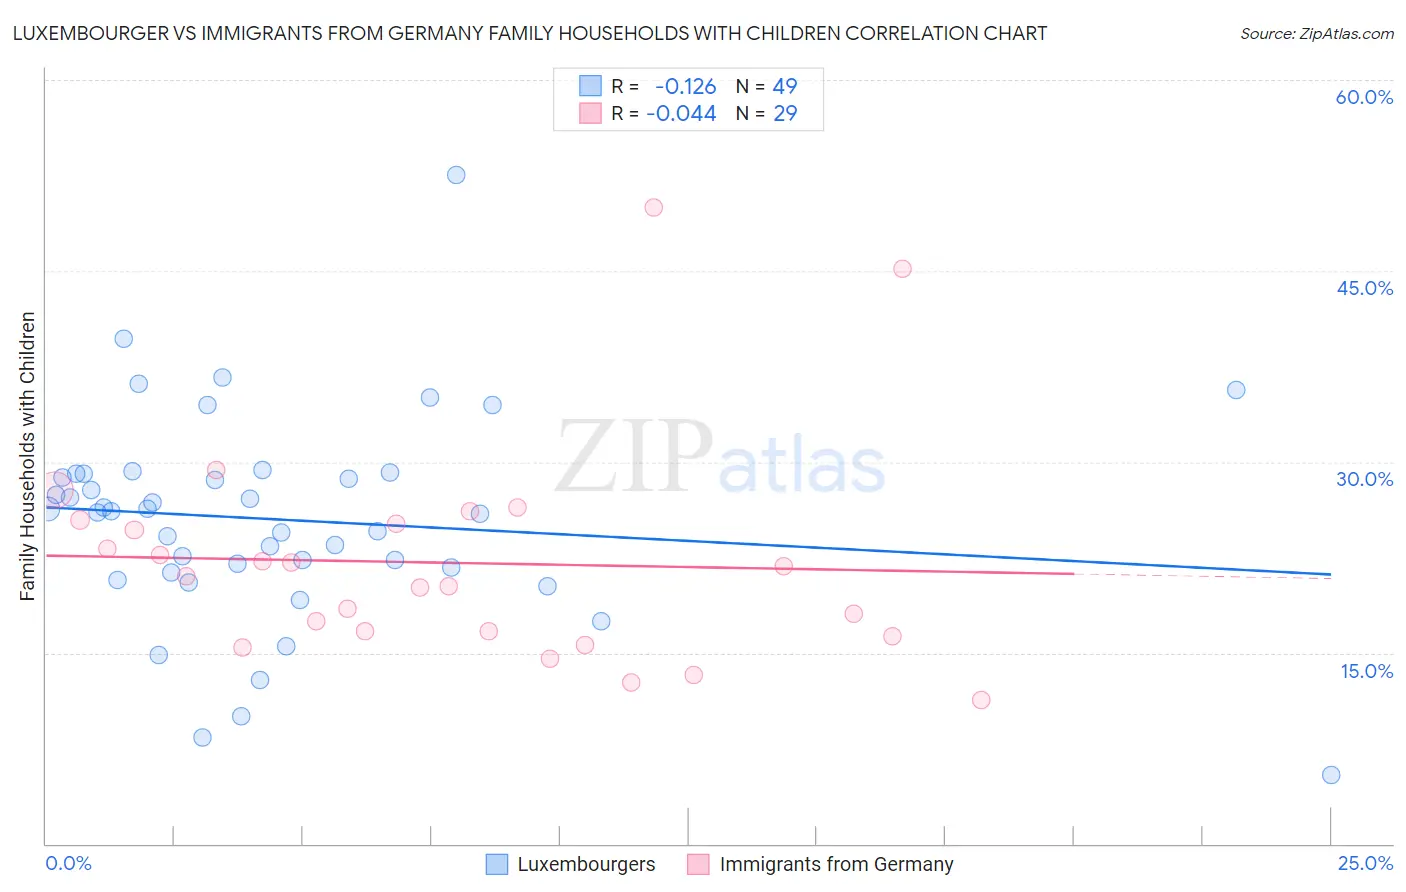 Luxembourger vs Immigrants from Germany Family Households with Children